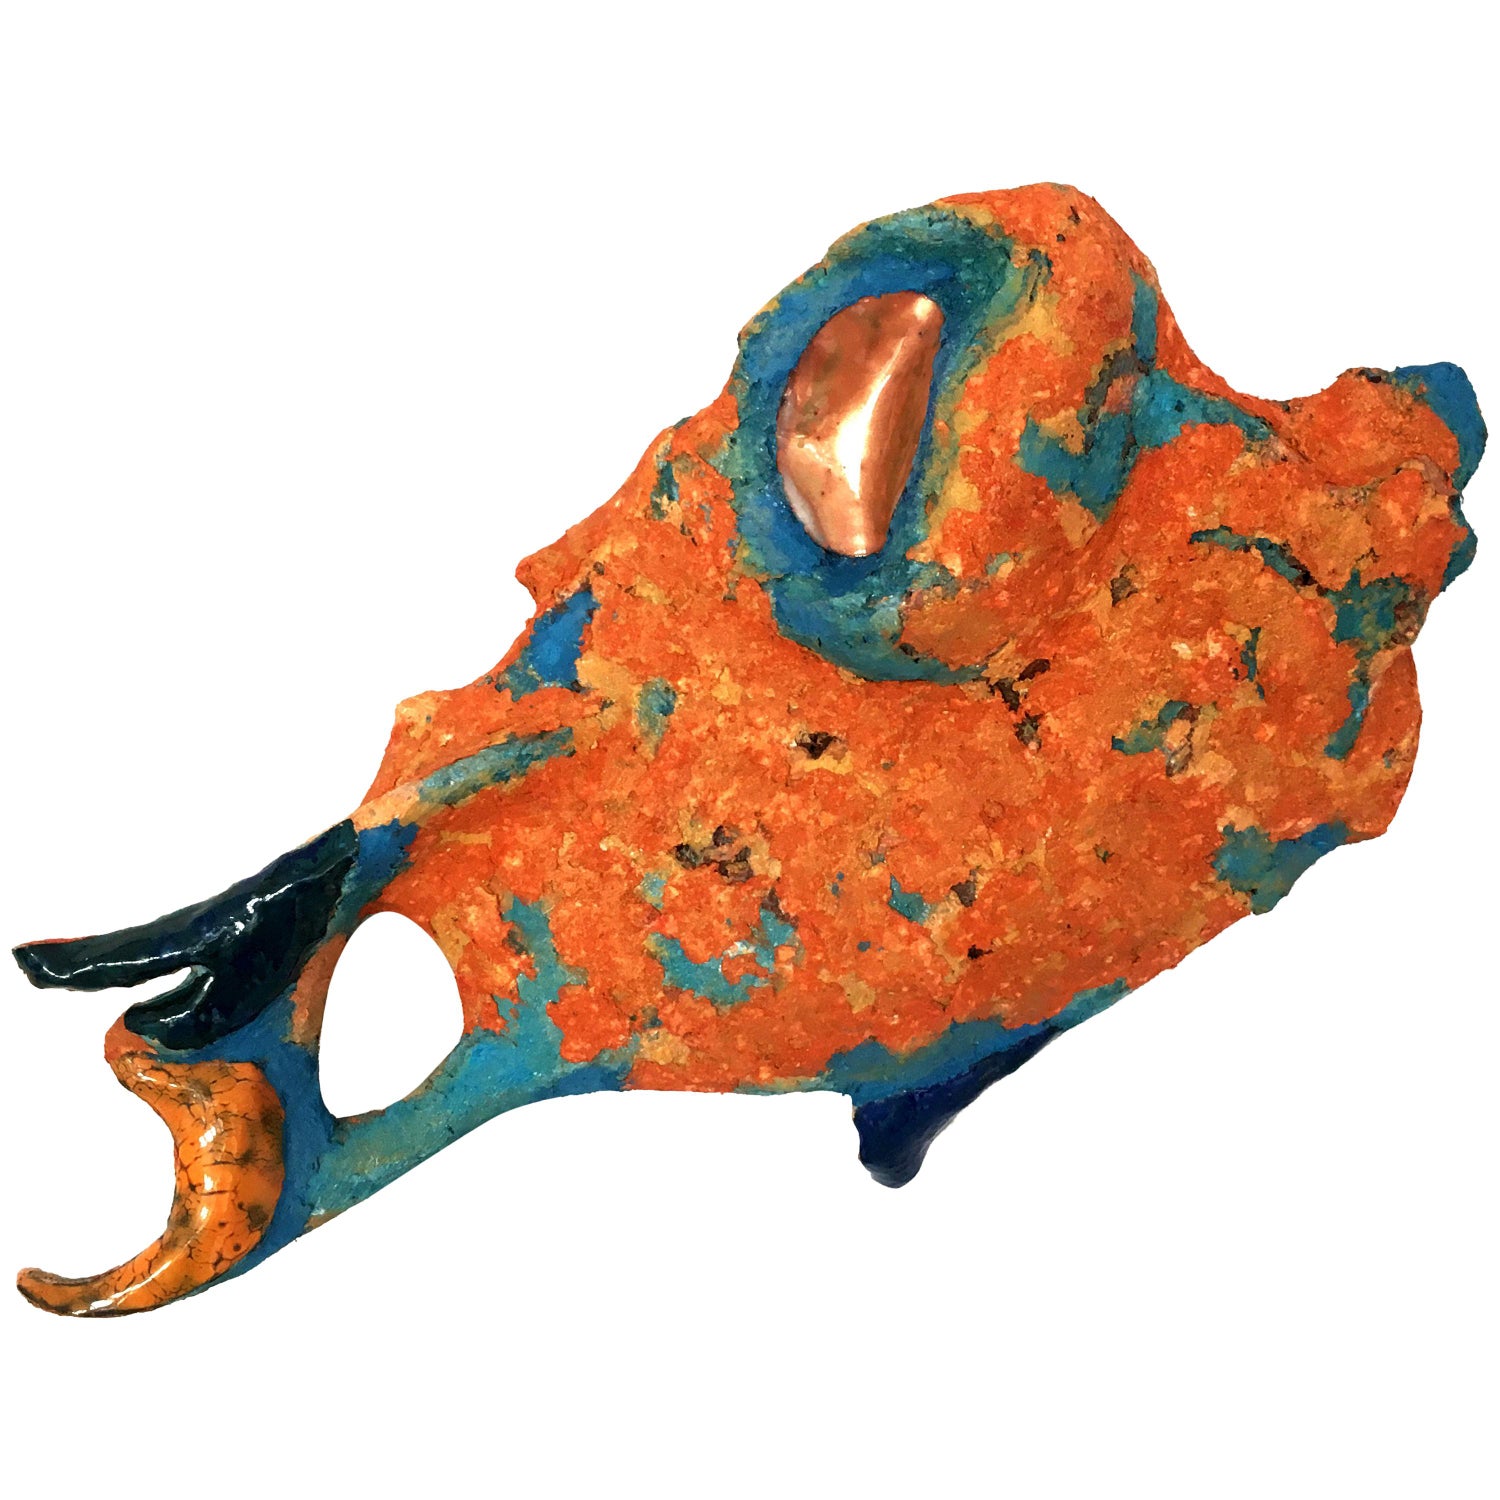 Fish Ii Handmade Ceramic And Paper Clay Wall Sculpture With Blue